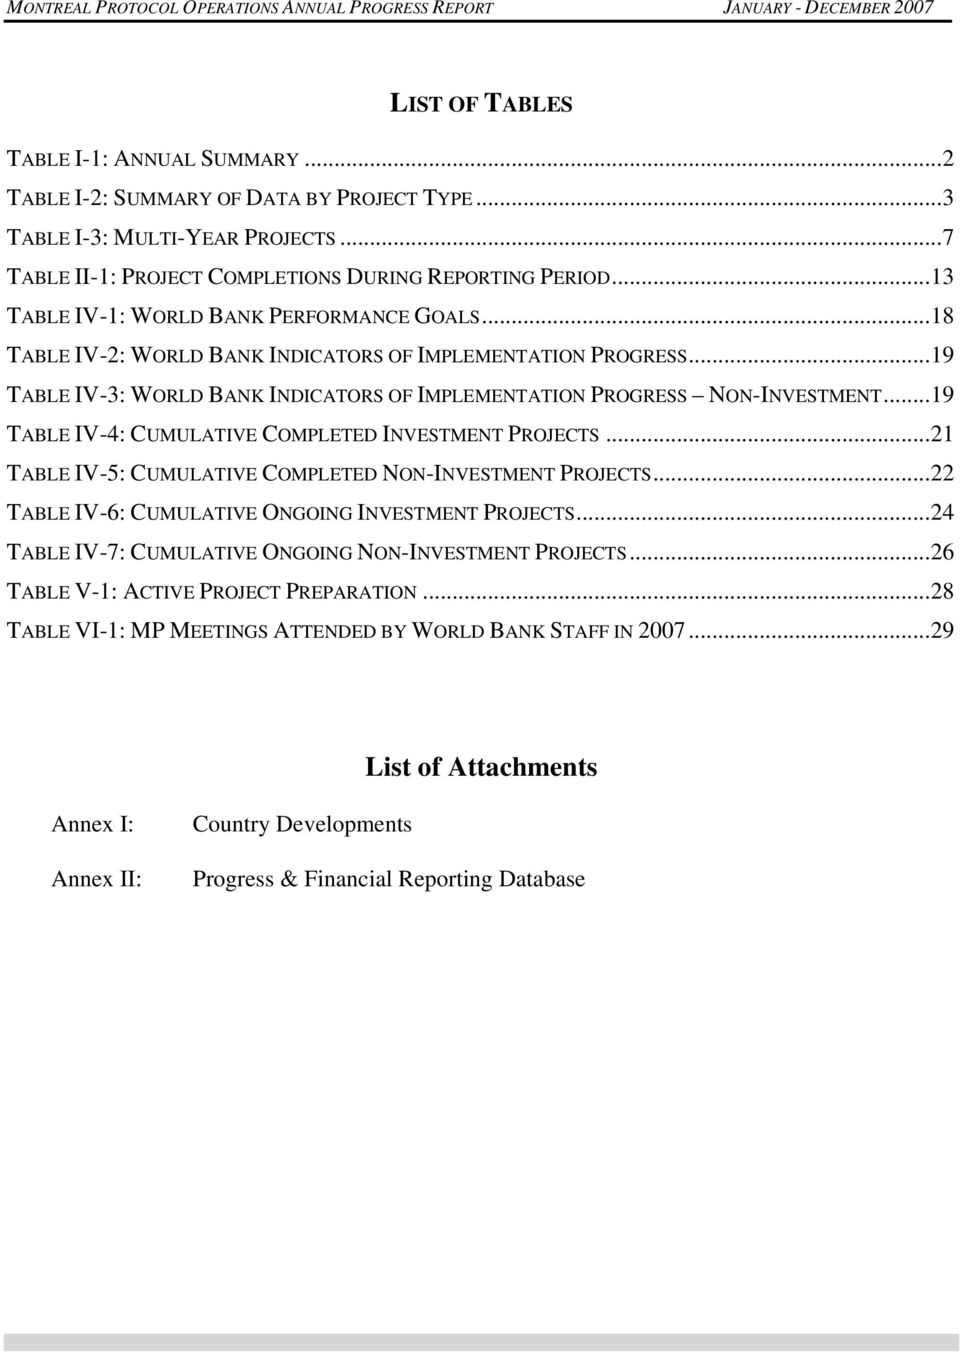 ..19 TABLE IV-3: WORLD BANK INDICATORS OF IMPLEMENTATION PROGRESS NON-INVESTMENT...19 TABLE IV-4: CUMULATIVE COMPLETED INVESTMENT PROJECTS...21 TABLE IV-5: CUMULATIVE COMPLETED NON-INVESTMENT PROJECTS.